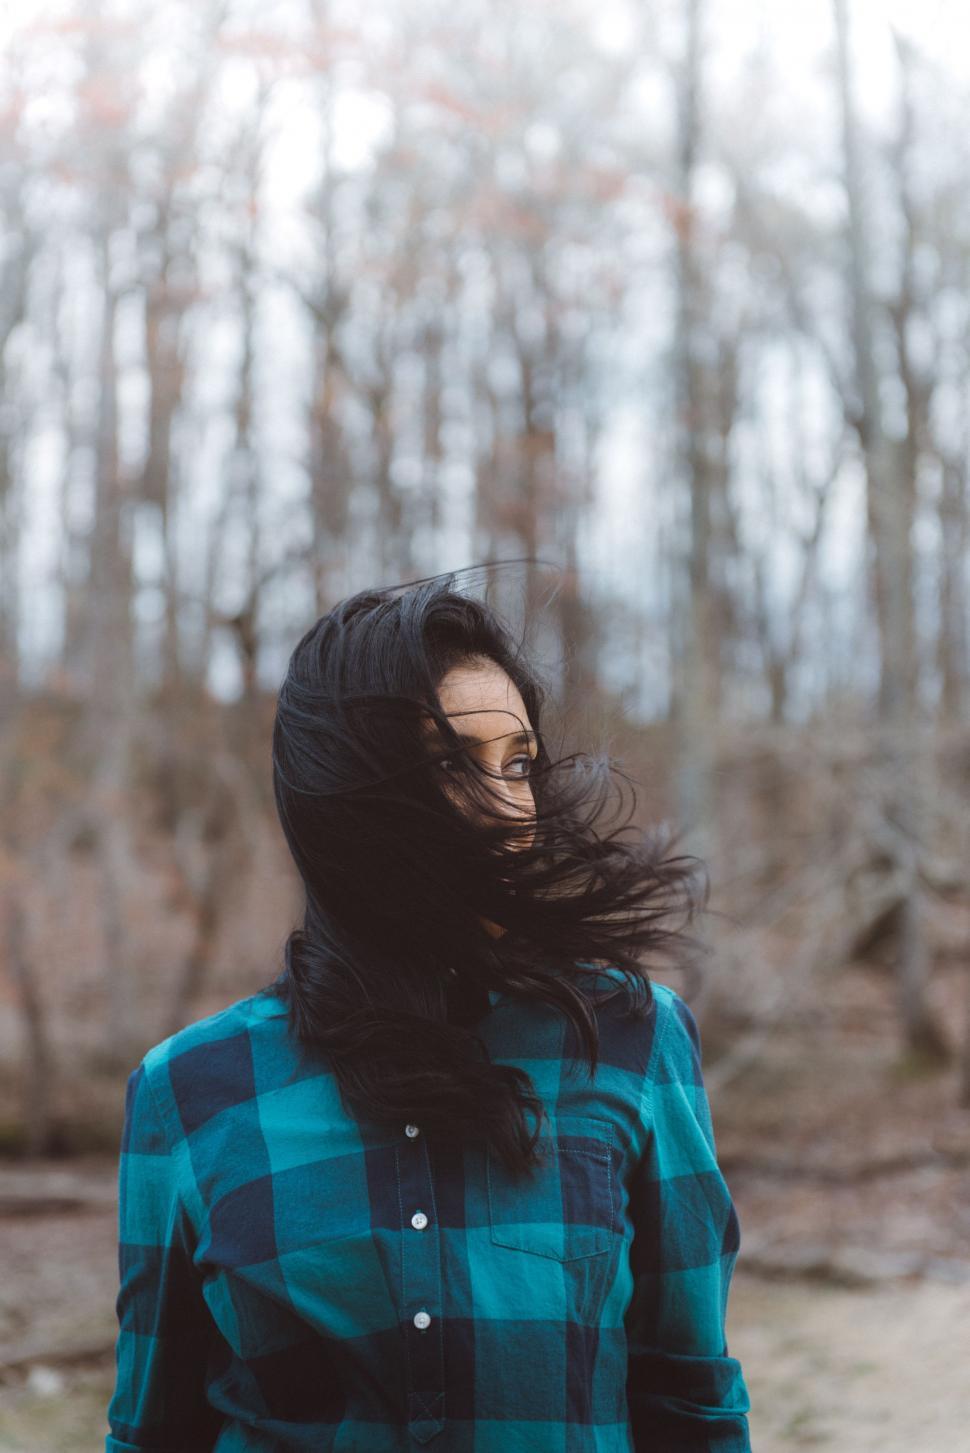 Free Image of Woman With Long Hair Standing in Front of Forest 